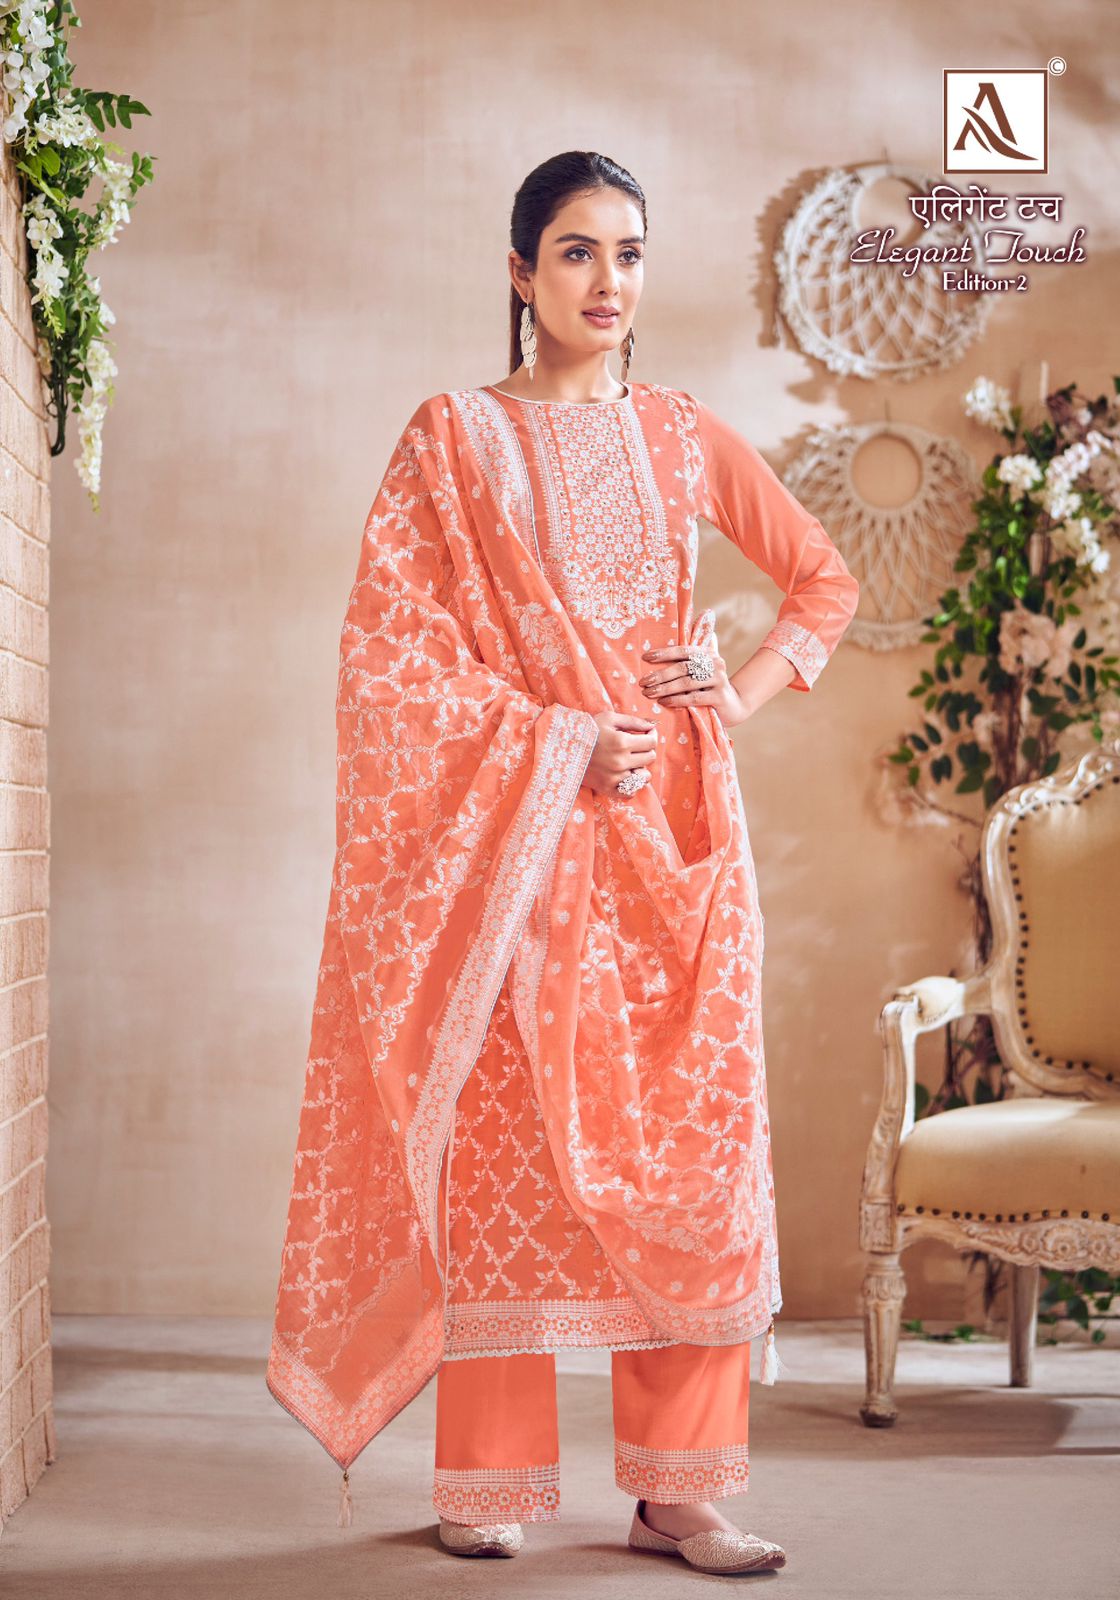 Alok Elegant Touch Vol 2 collection 6